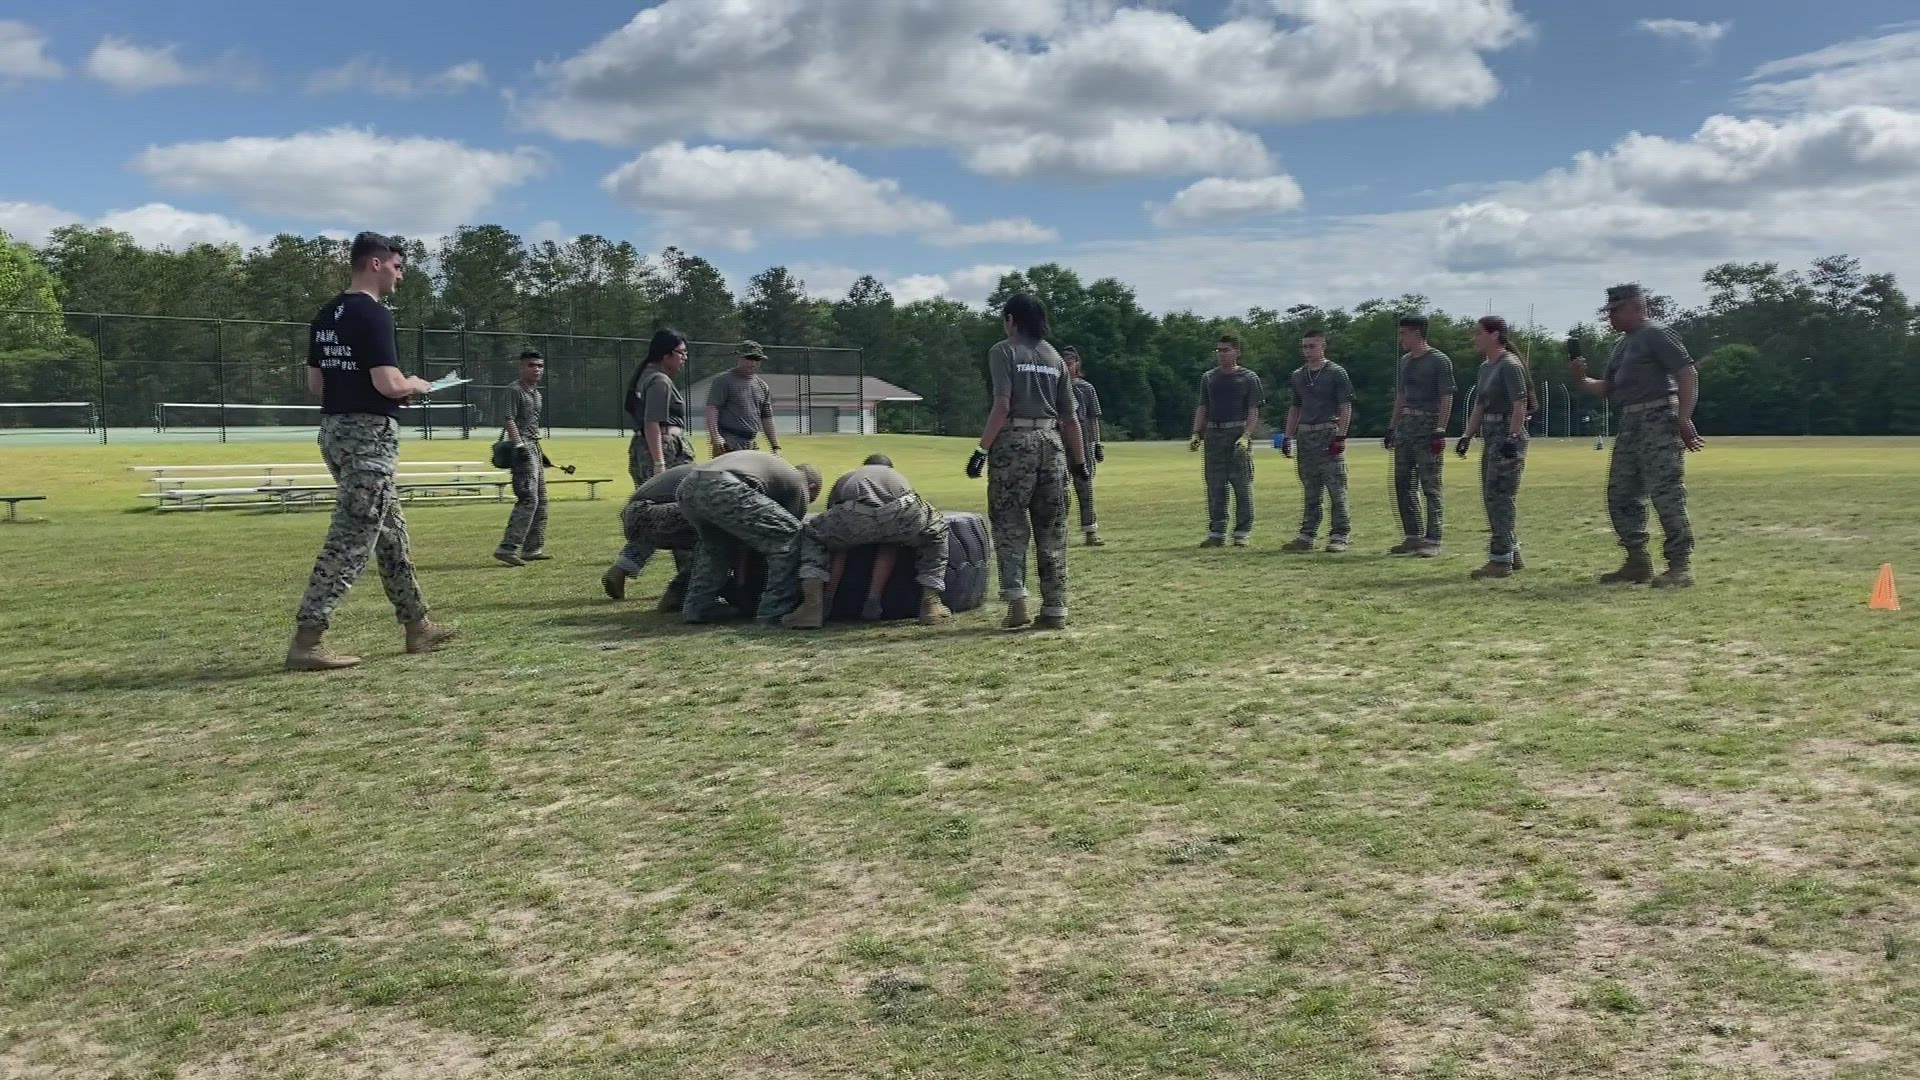 The series of challenges kicked off with a team run, followed by a tire flip, fitness course, rope bridge, and more.